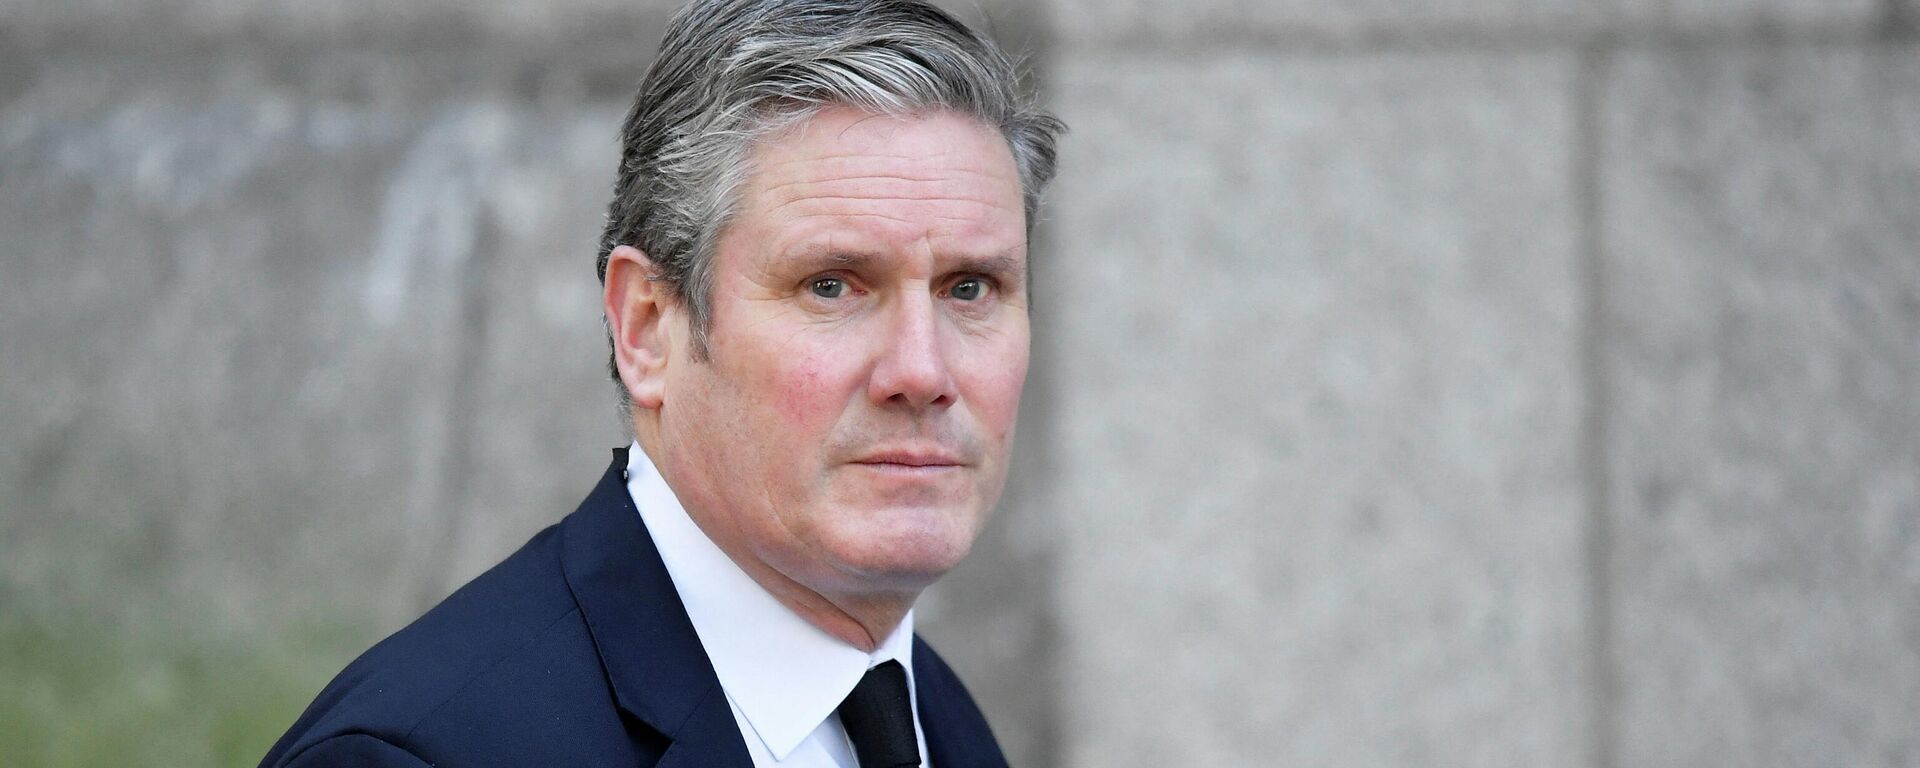 FILE PHOTO: Britain's Labour Party leader Keir Starmer arrives for the remembrance mass of MP David Amess, who was stabbed to death during a meeting with constituents, at Westminster Cathedral in London, Britain, November 23, 2021 - Sputnik International, 1920, 07.02.2022